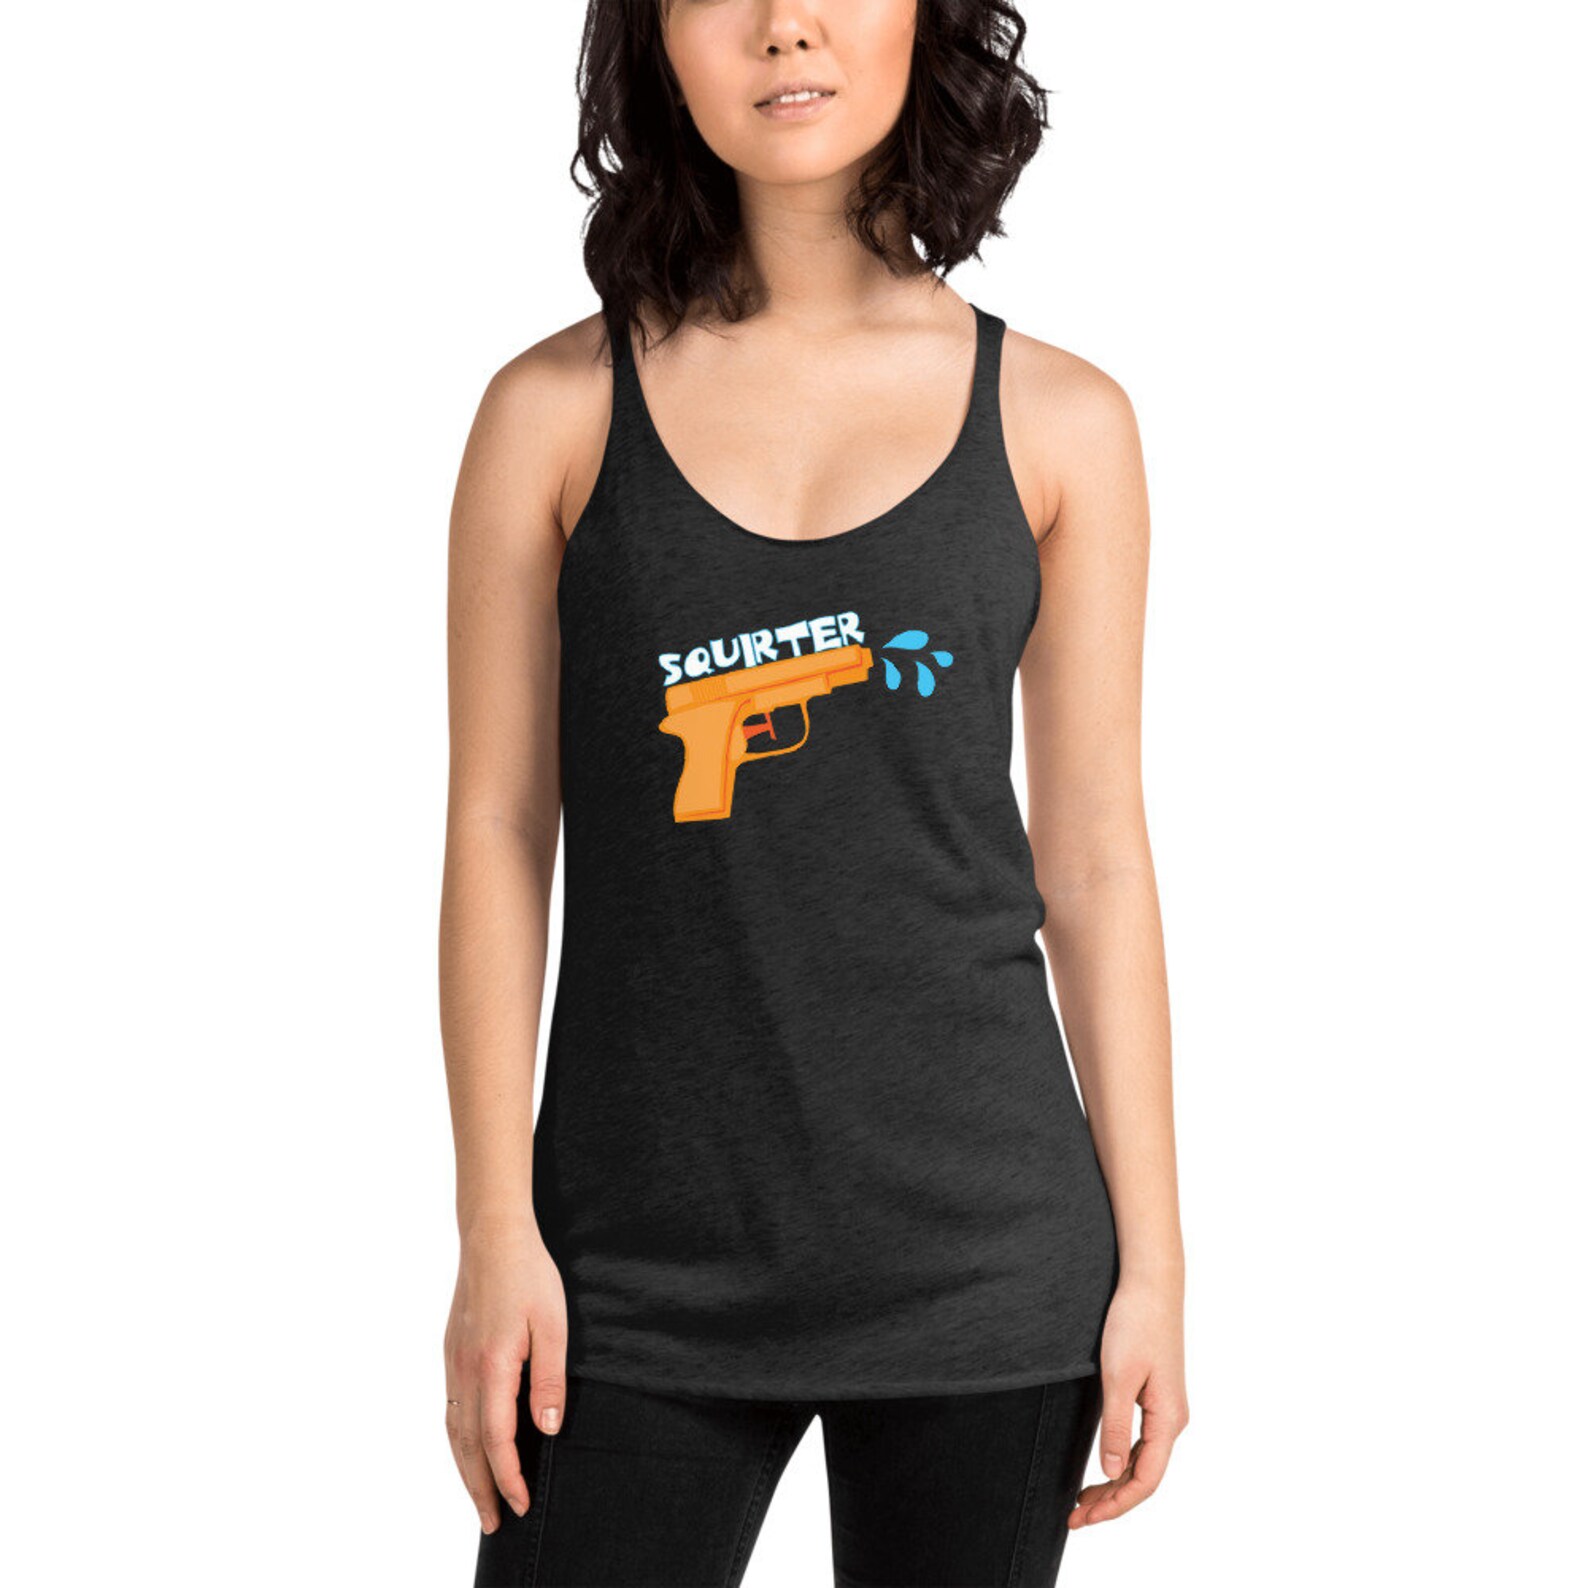 Squirter Tank Top Squirting Pussy Shirt Wet Pussy Water Gun Etsy